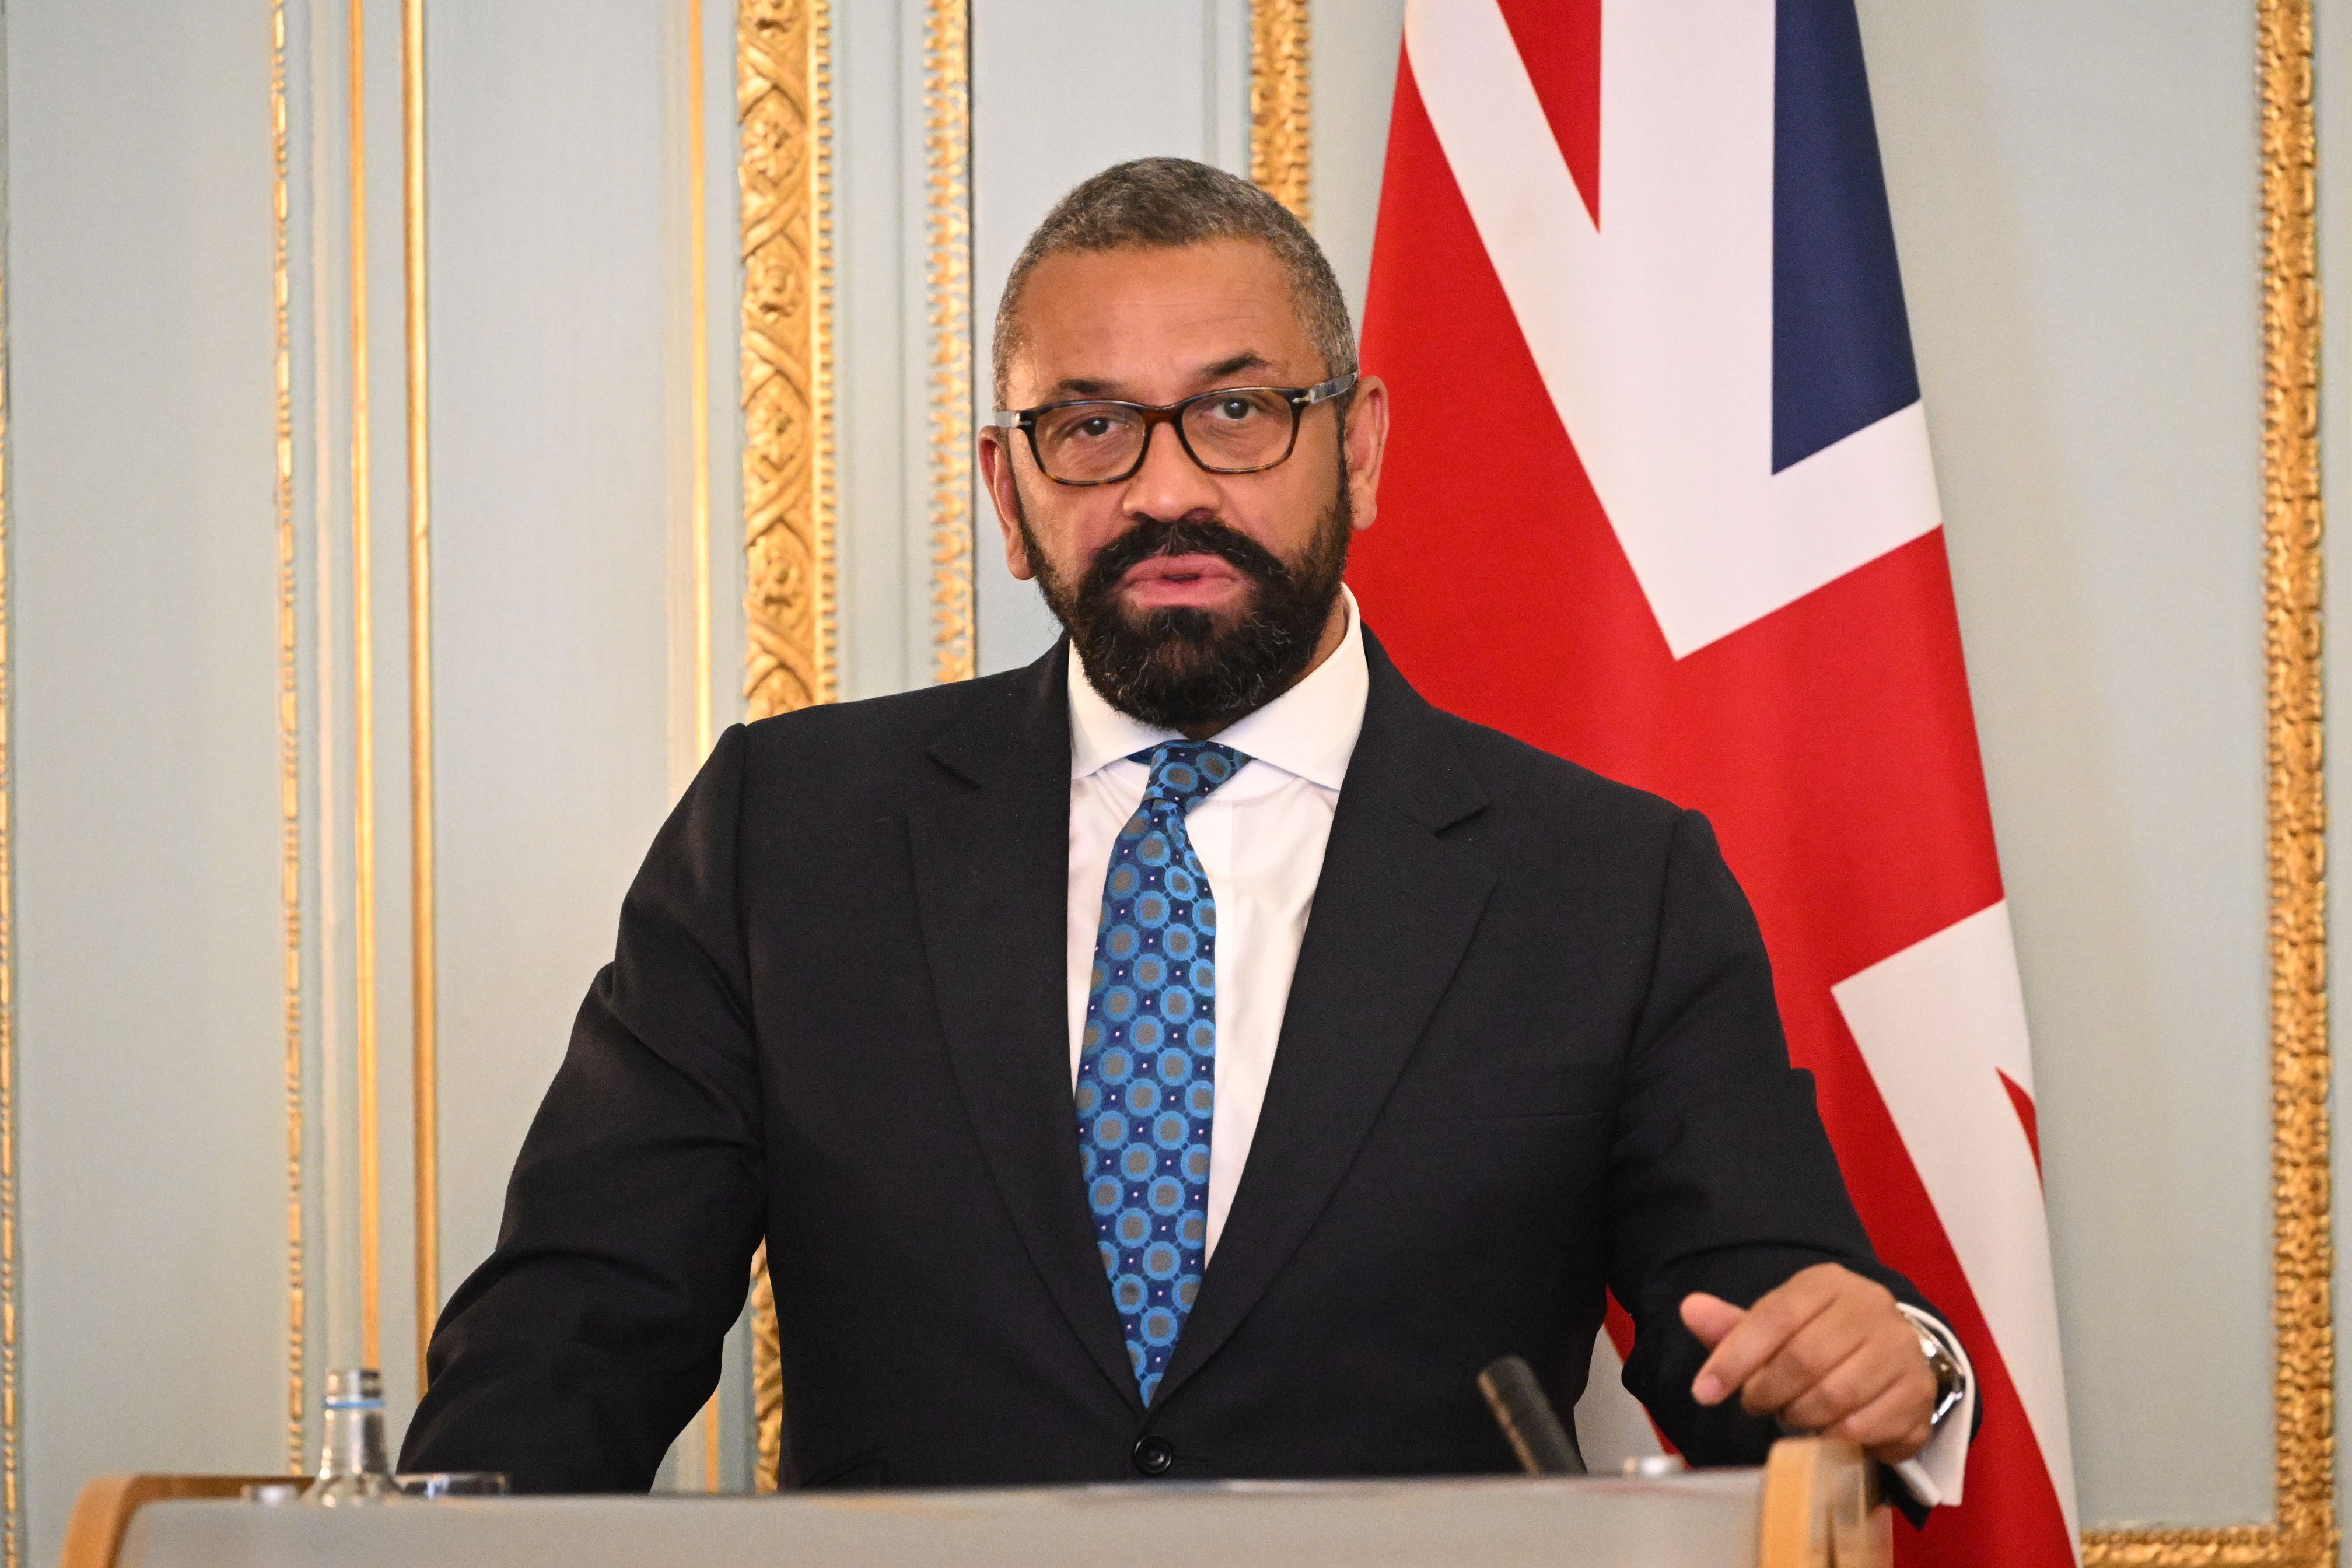 Foreign secretary James Cleverly has said he wants to ‘stay put’ as foreign secretary